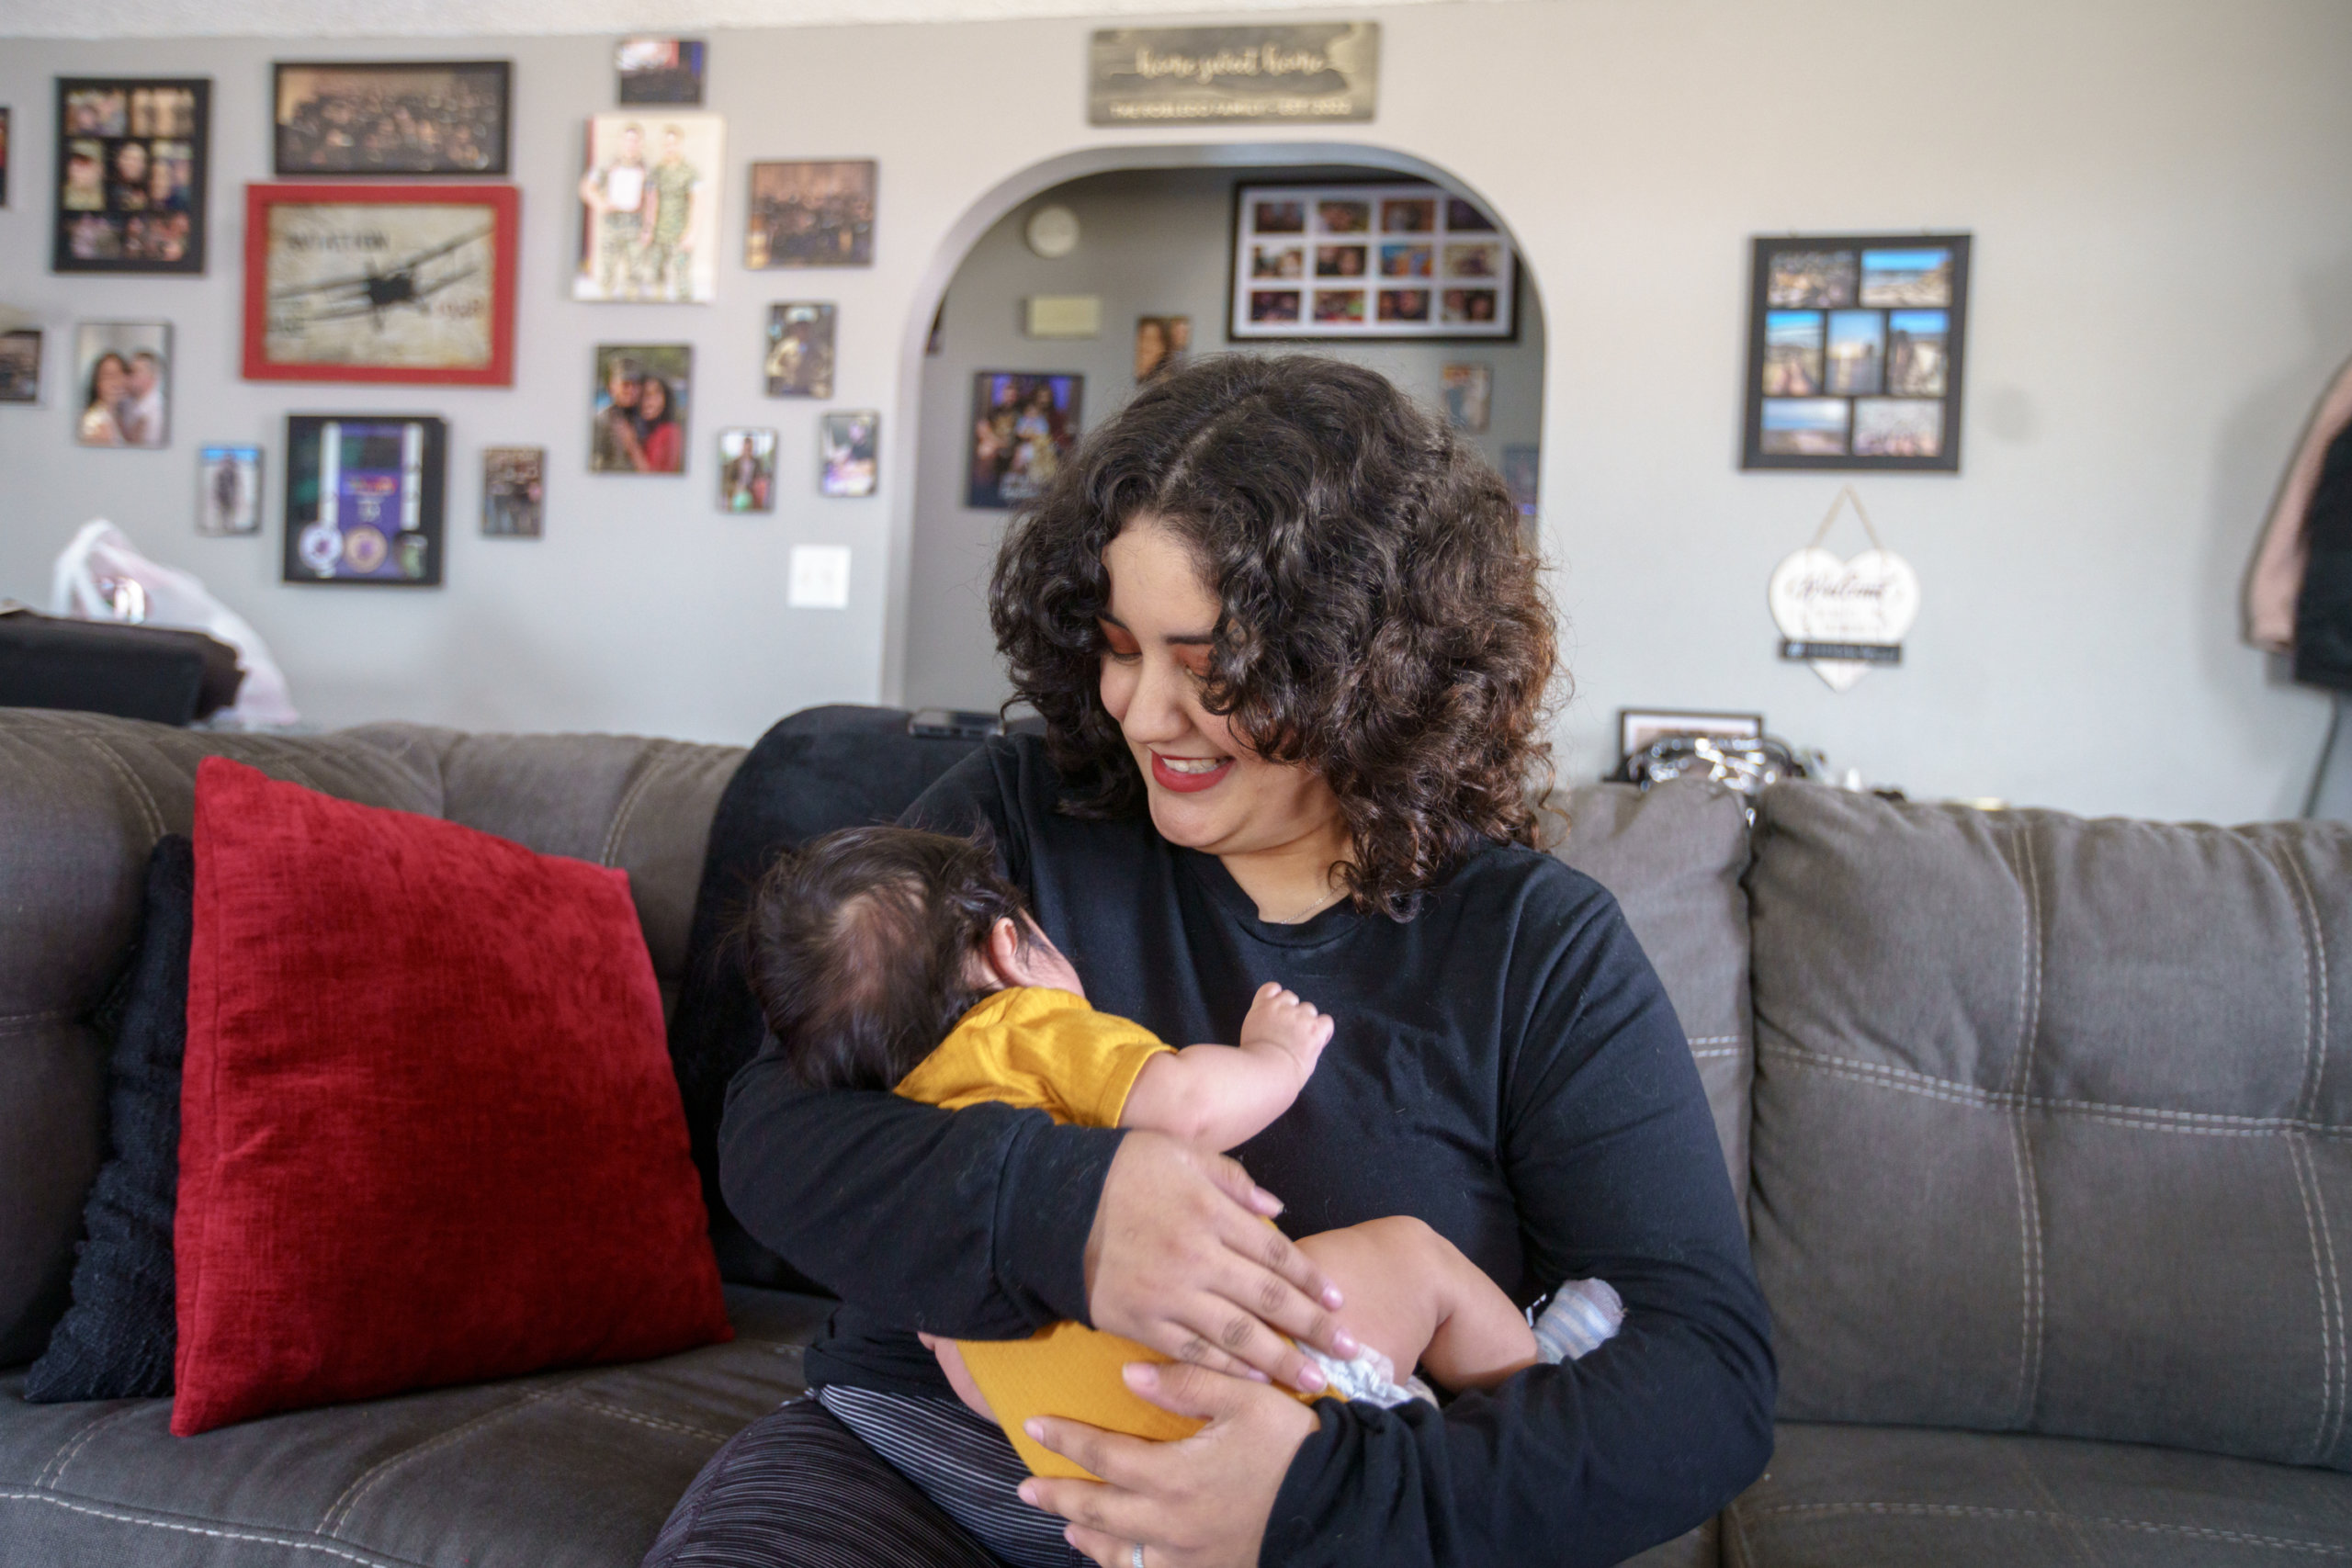 Maternal health crisis in New Mexico: Services shrink, risks grow